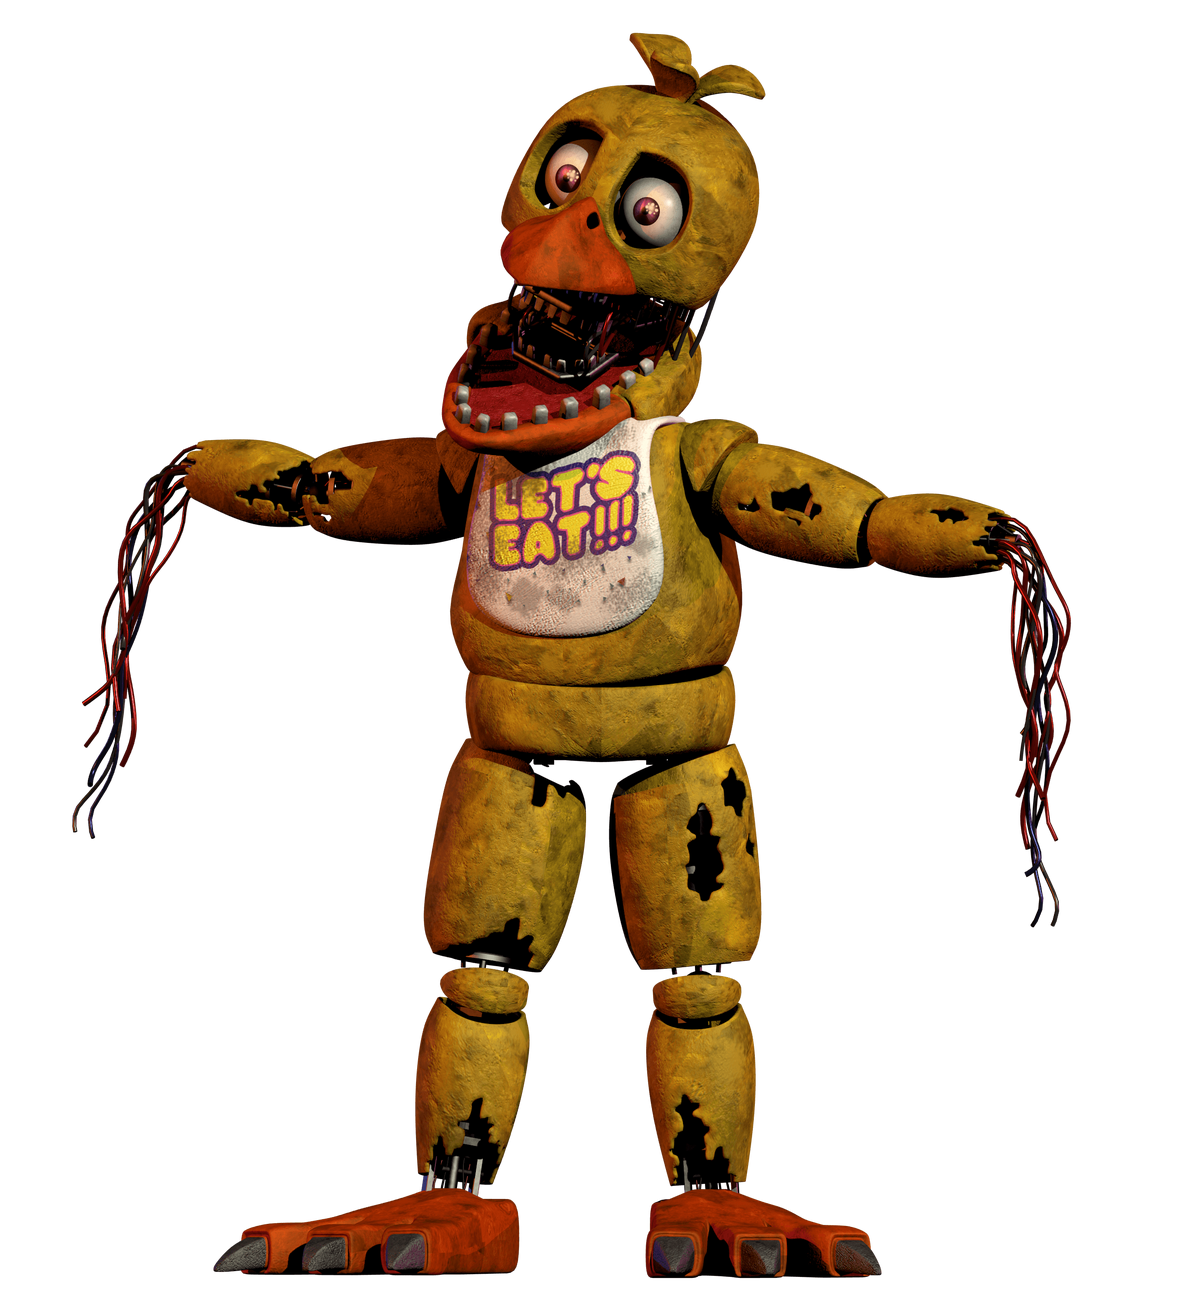 Withered Chica Fan Casting for Five Nights At Freddy's A Shattered